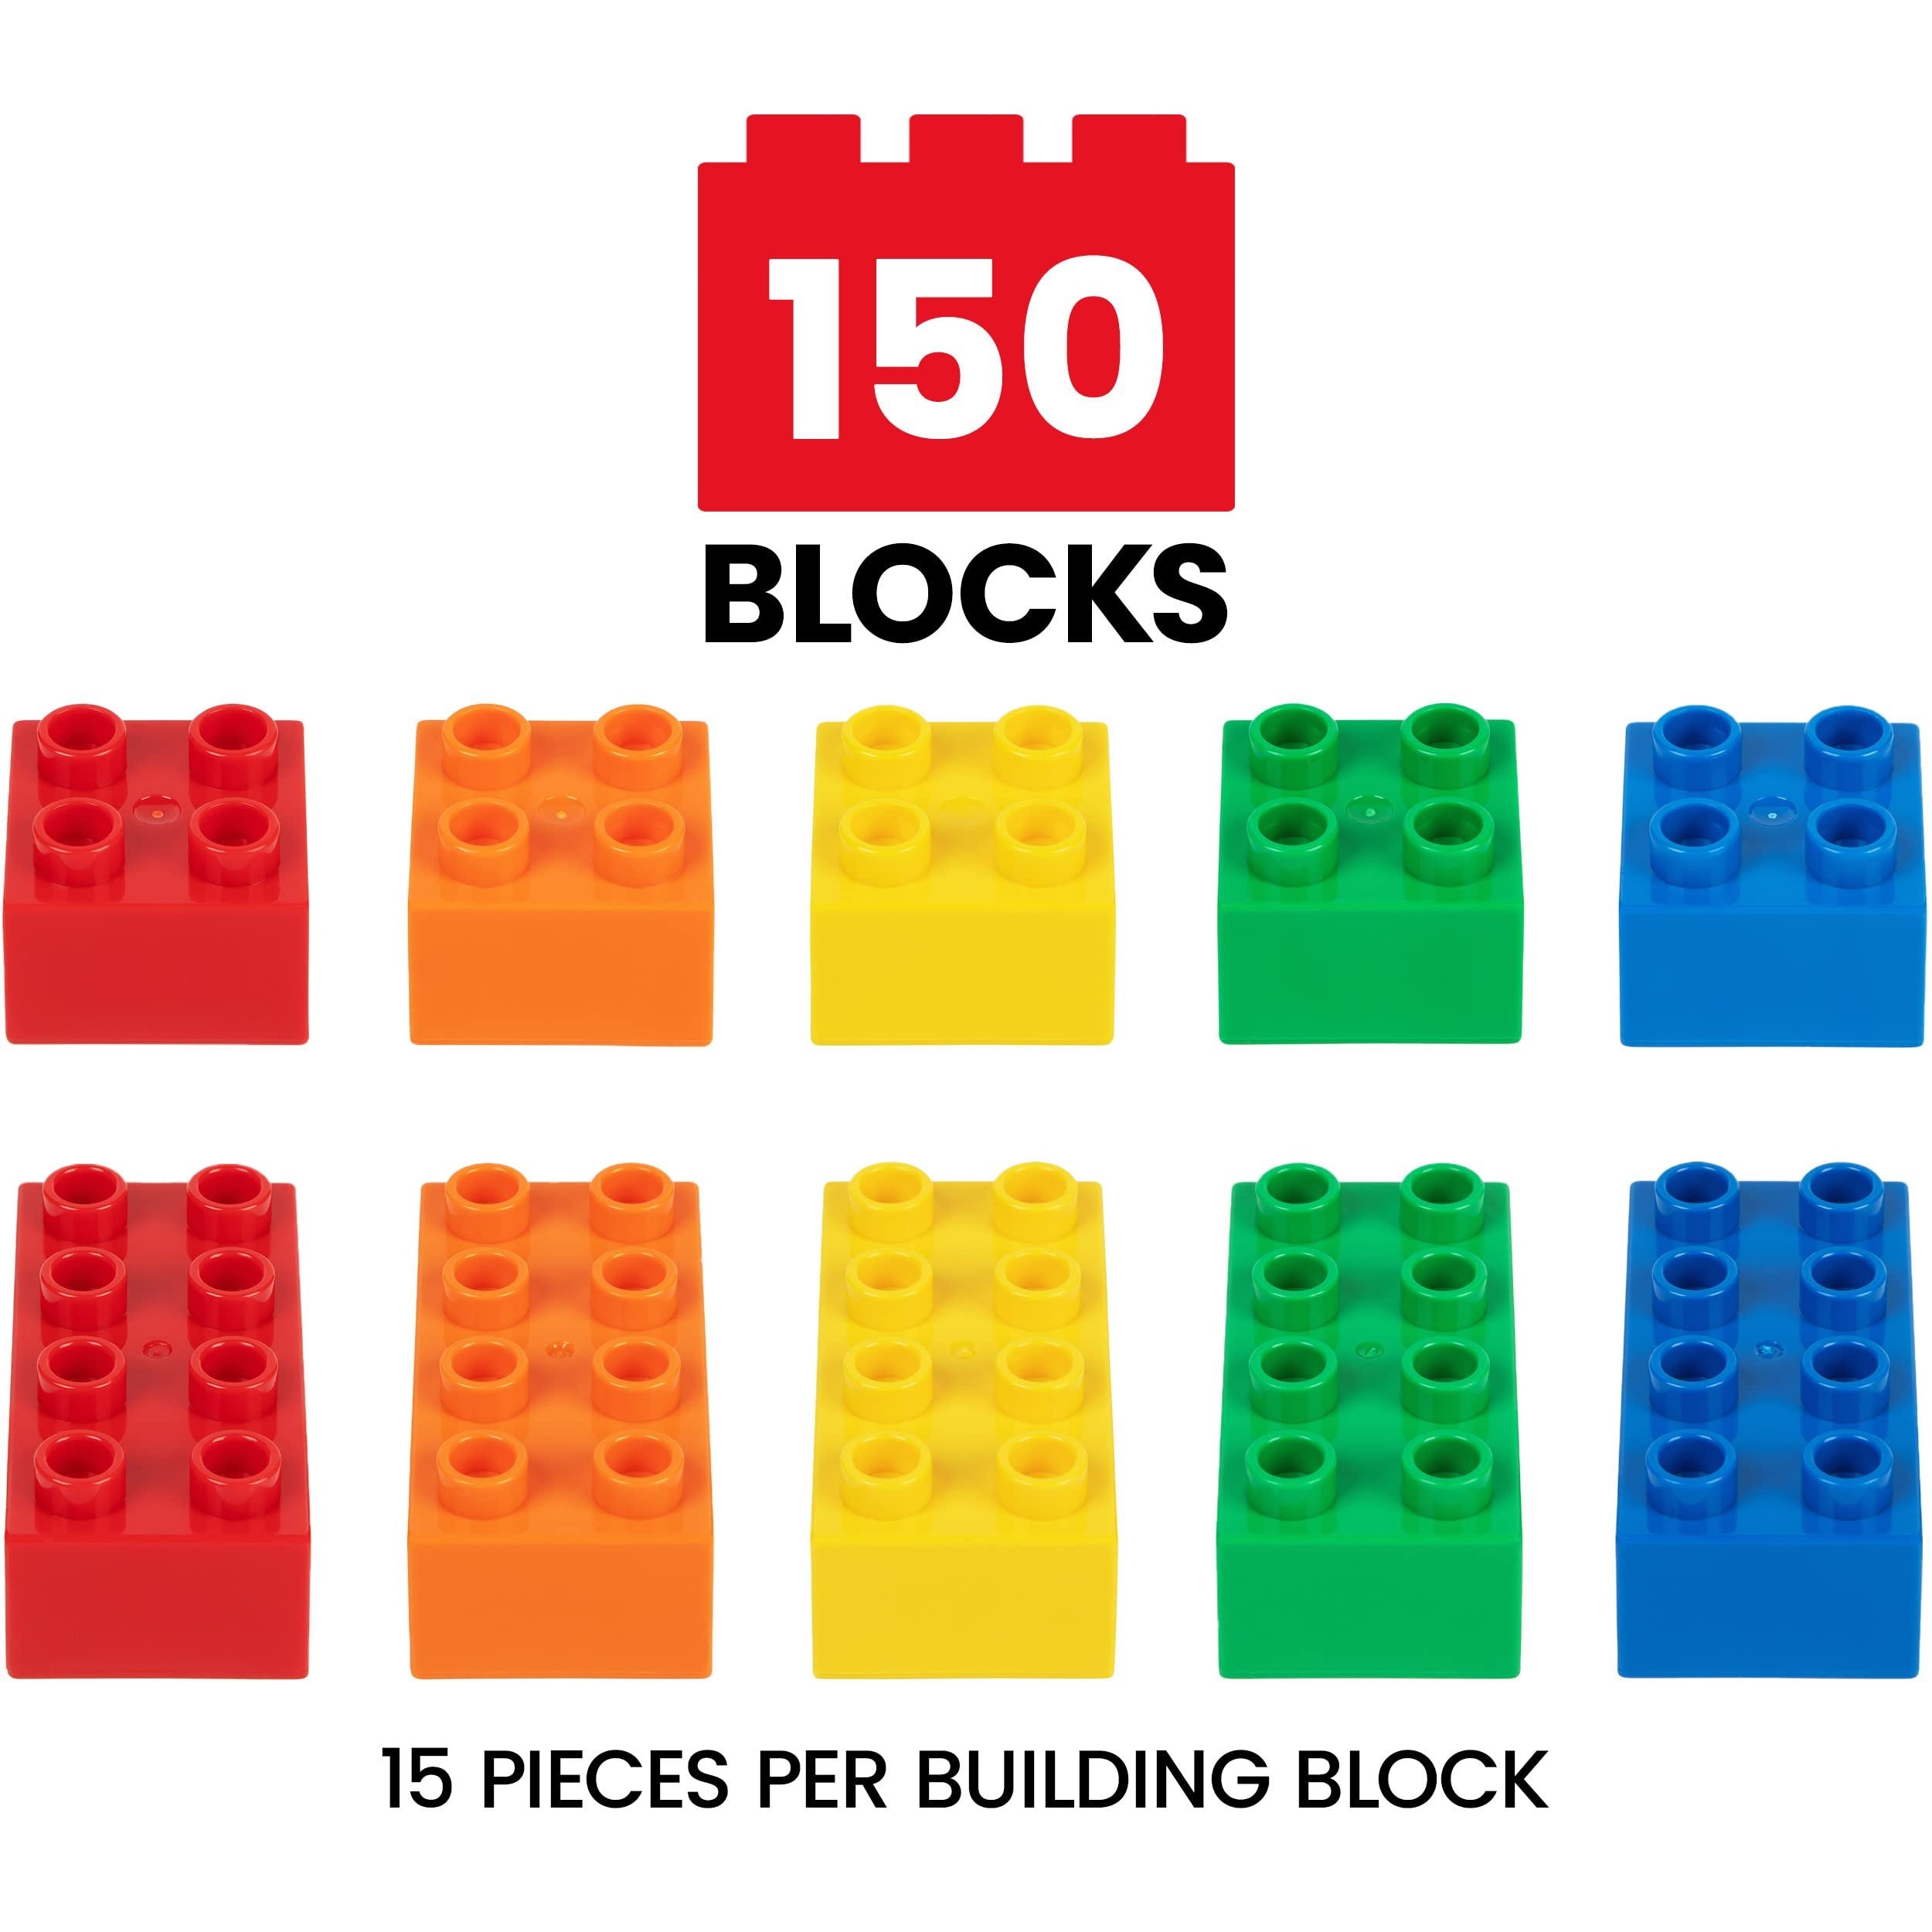 PREXTEX Building Blocks for Toddlers 1-3+ (300 Mega Blocks) Large Toy Blocks Compatible with Most Major Brands - Kids Toys Gift Set for All Ages (Boys & Girls)